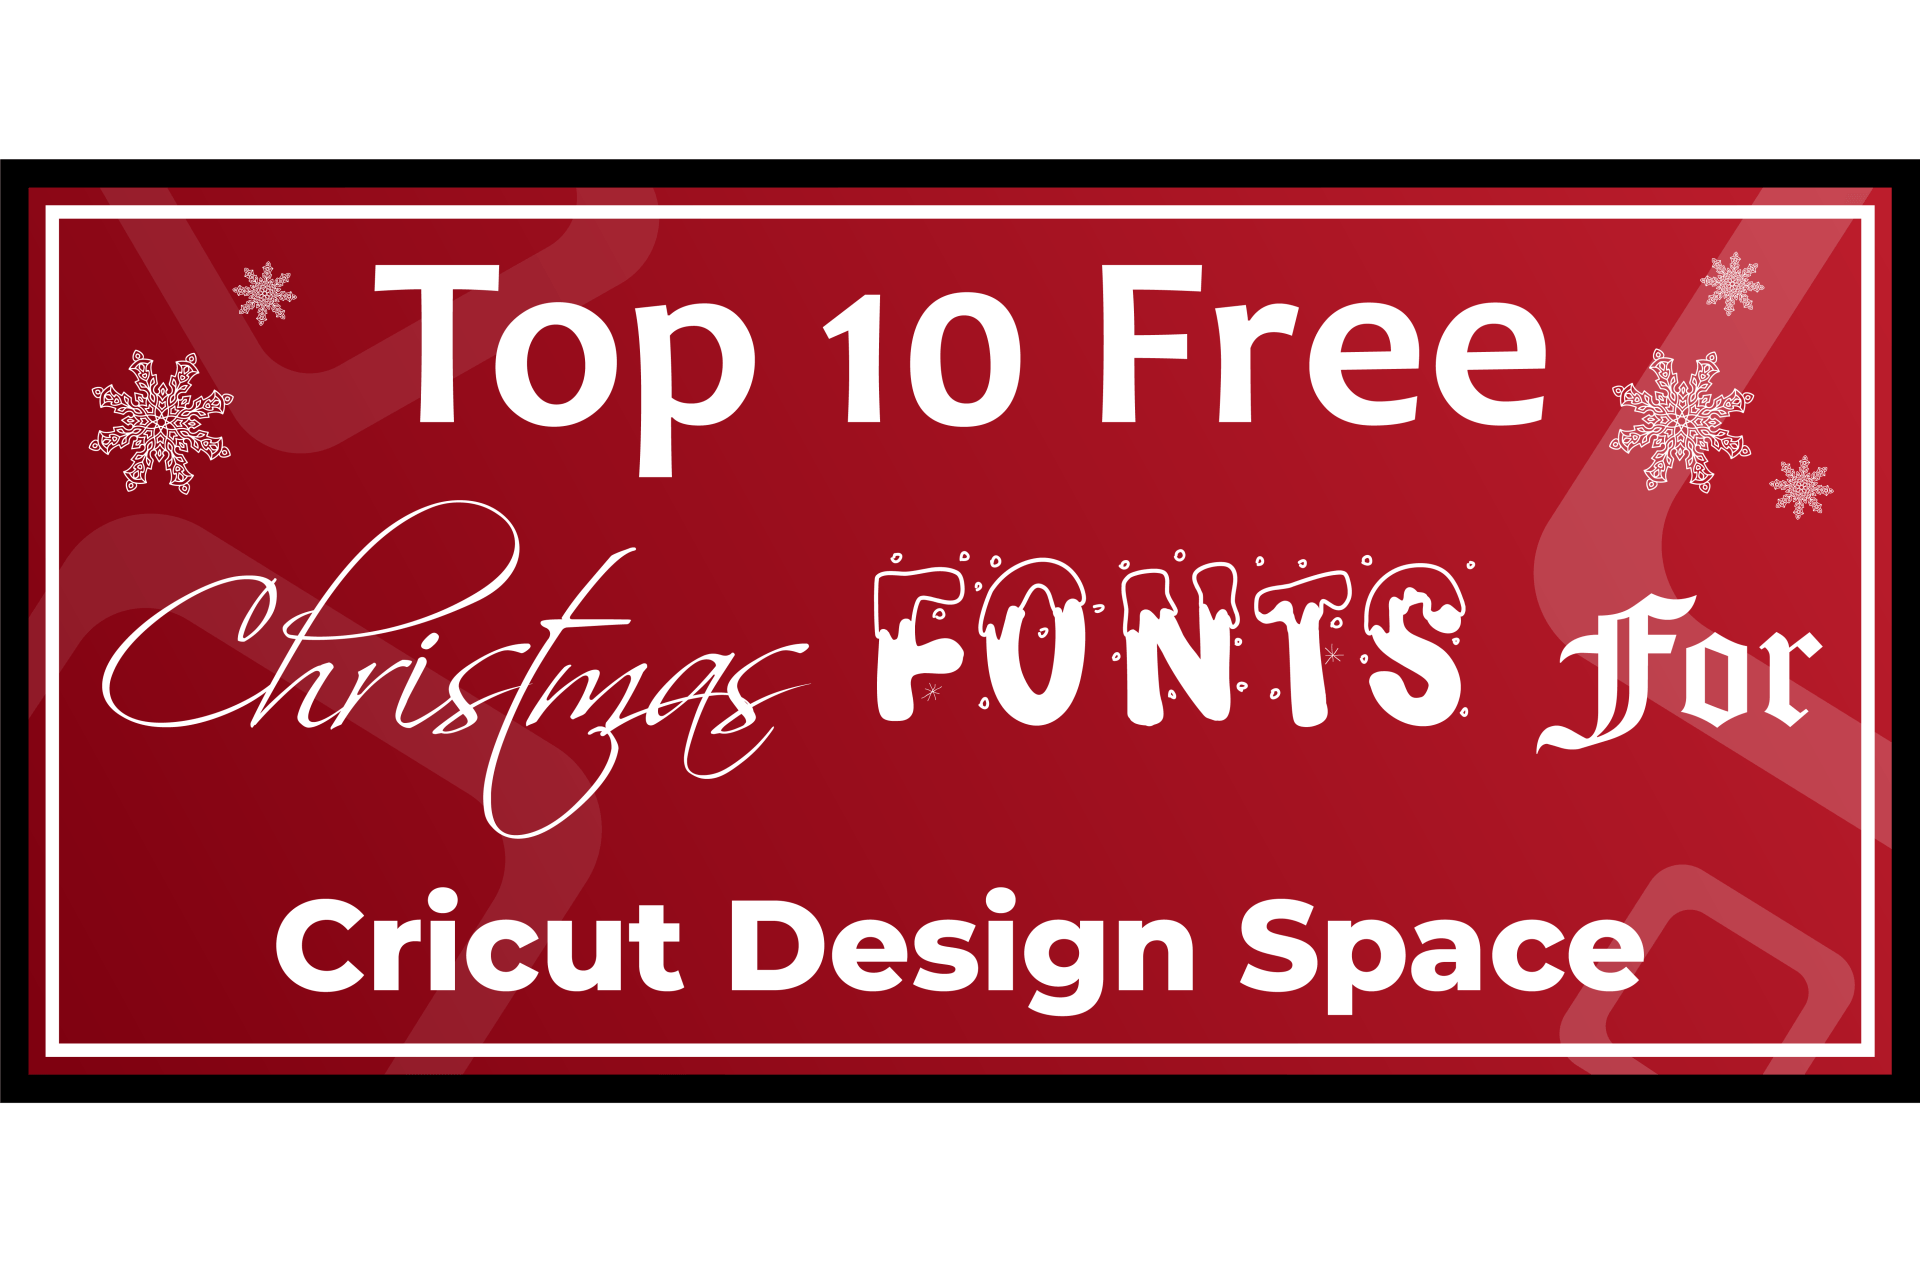 Top 10 Free Christmas Fonts for Cricut Design Space